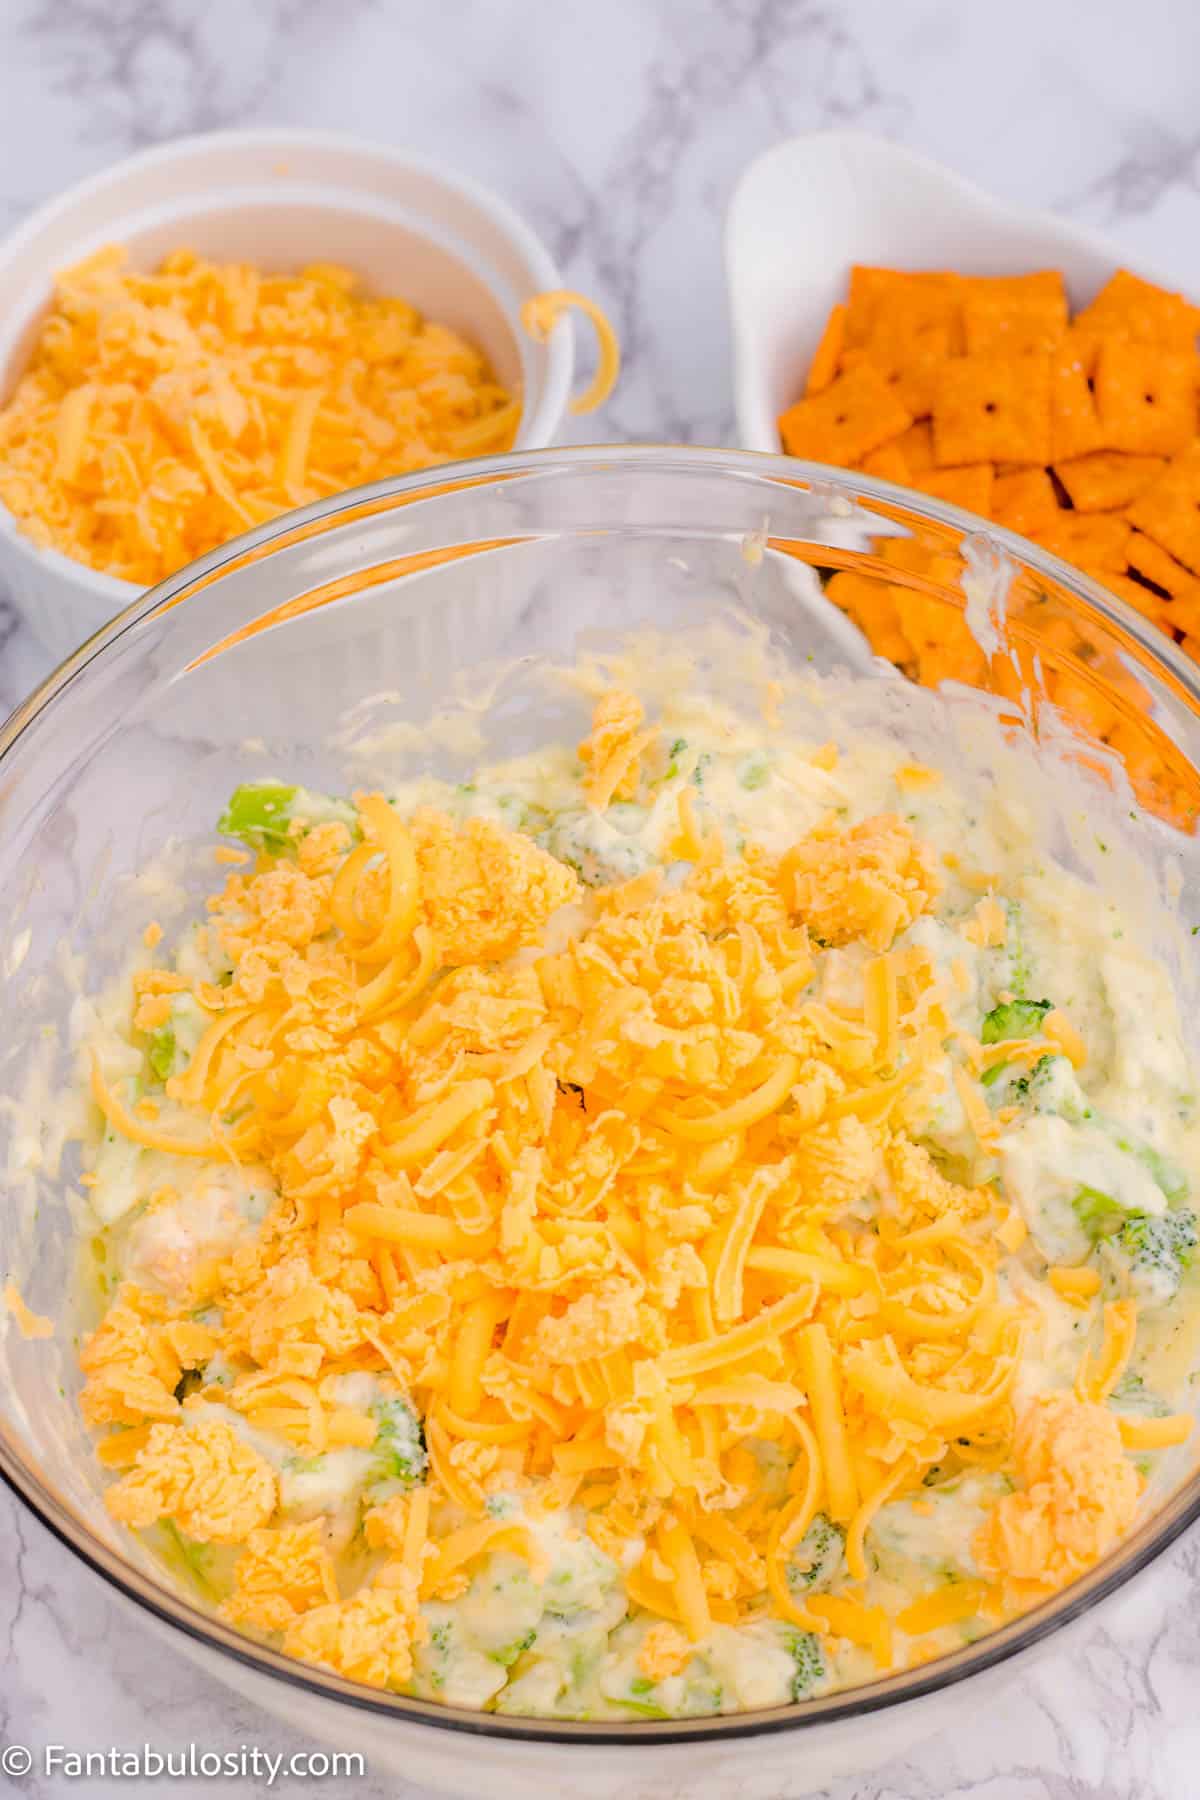 shredded cheese in broccoli mixture